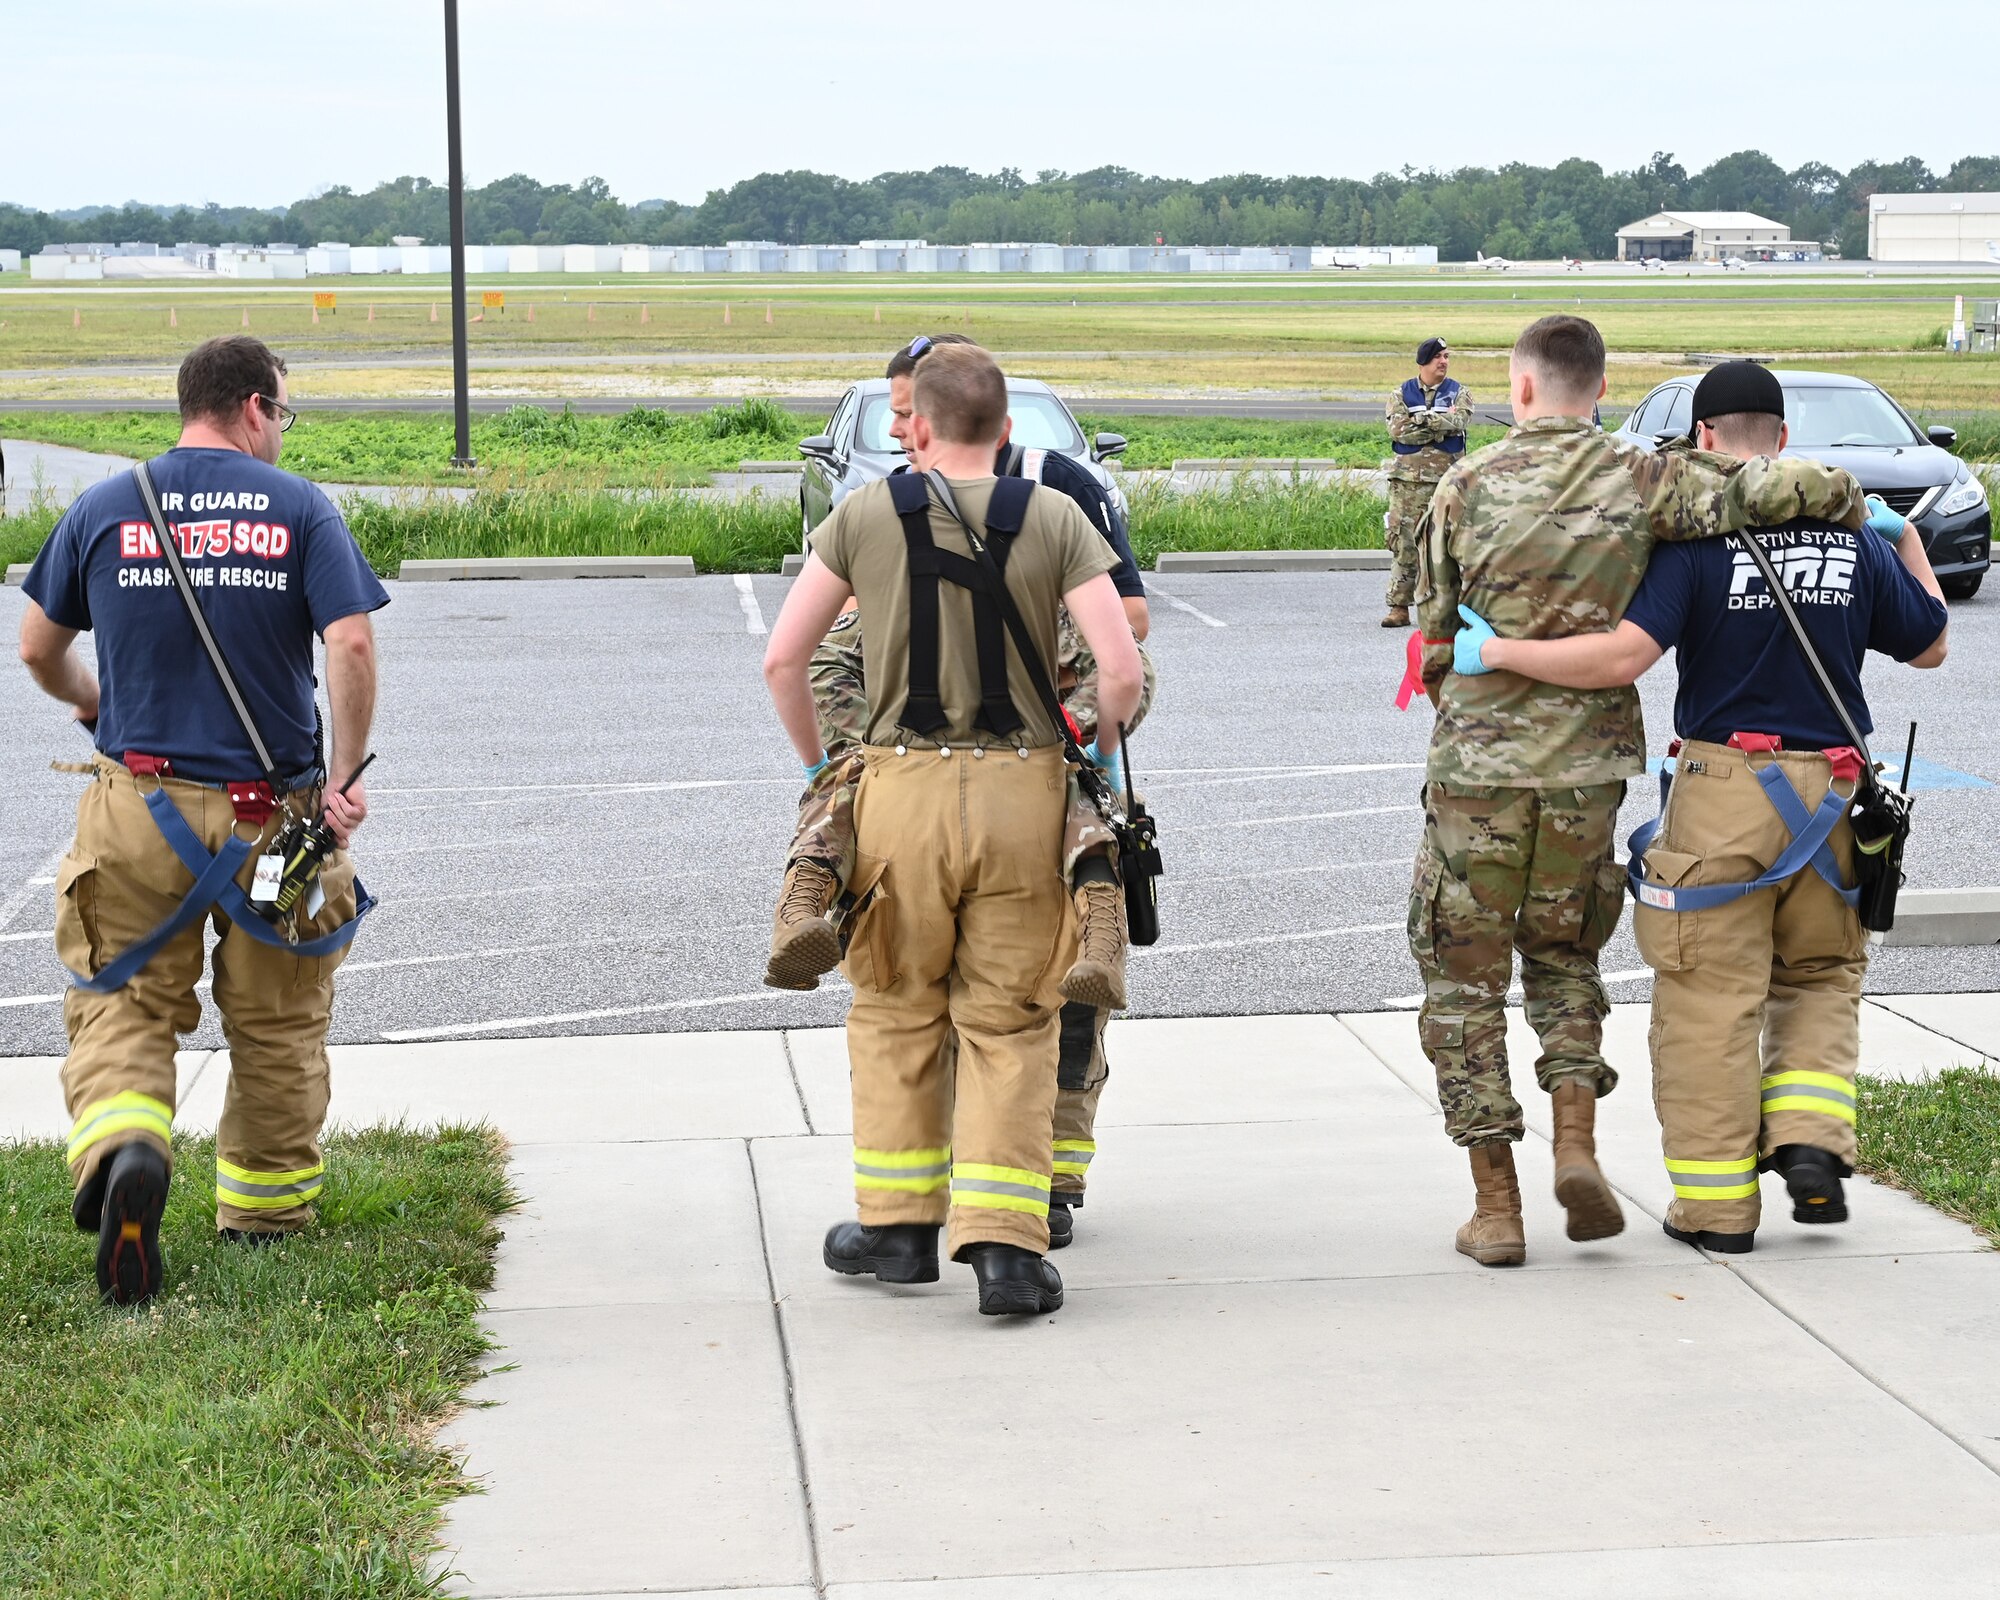 Members of the Maryland Air National Guard Fire Department transport simulated patients during an active shooter exercise at Martin State Air National Guard Base, Middle River, Md., Aug. 25, 2023.